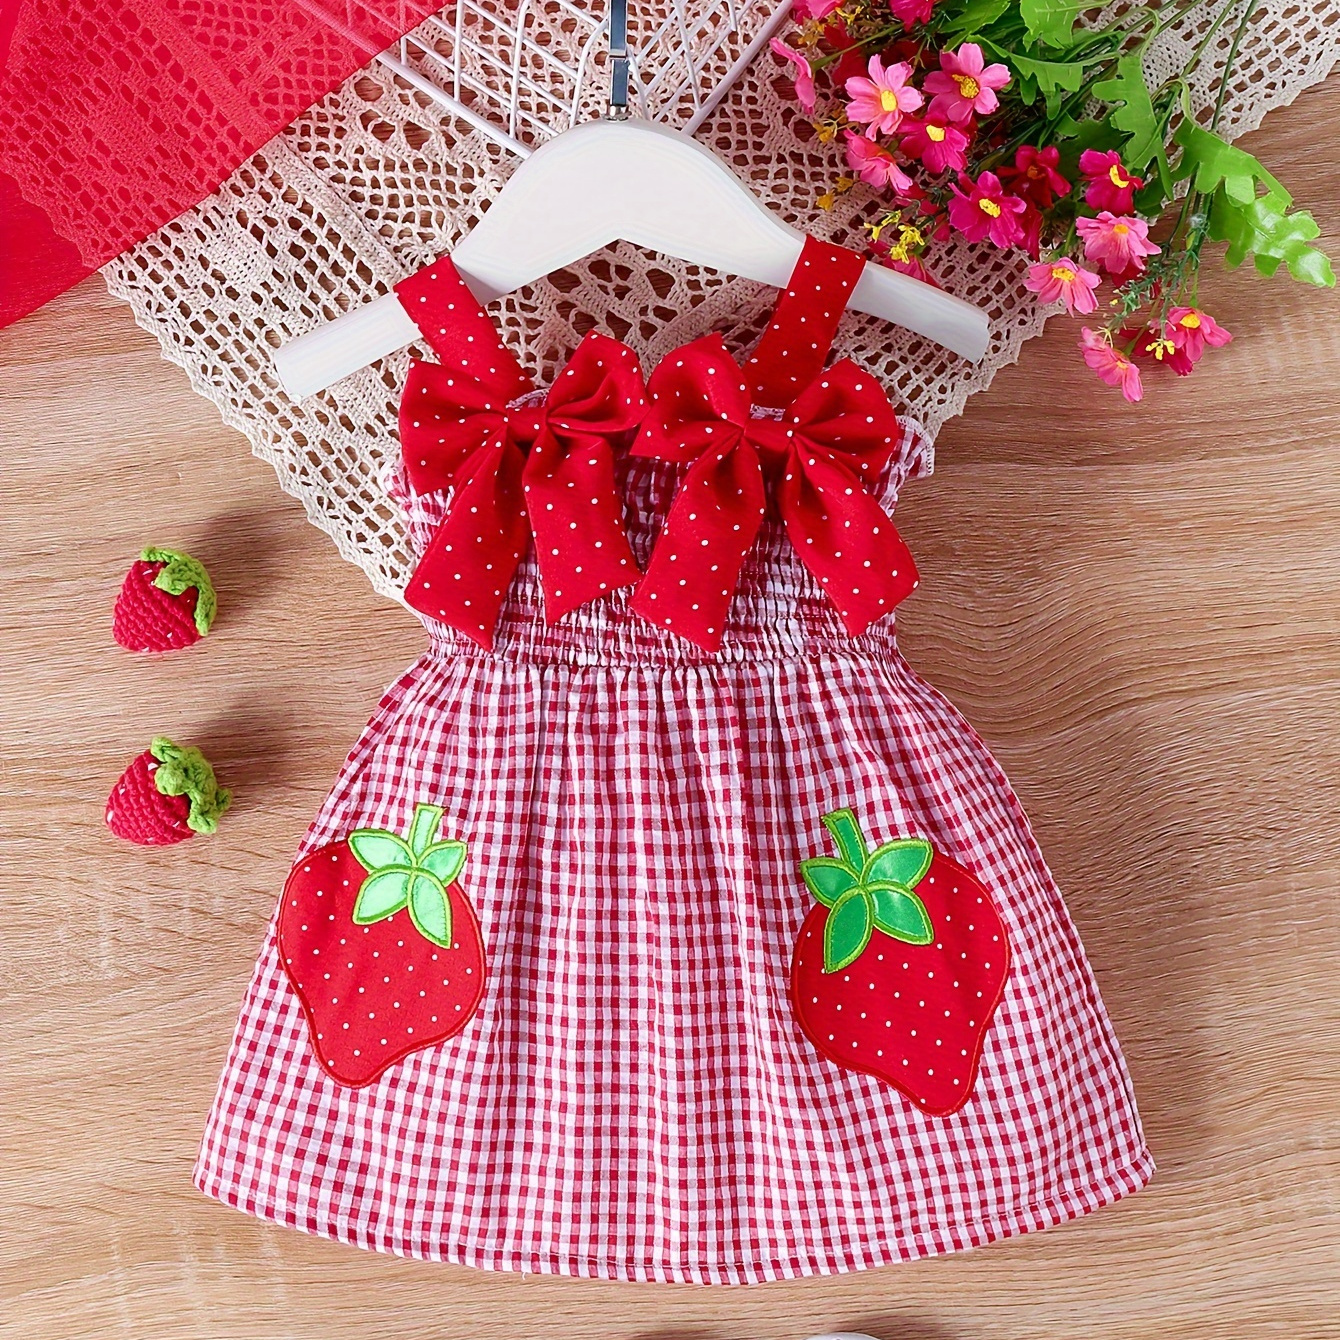 

Baby's Bowknot Decor Strawberry Embroidered Gingham Sleeveless Dress, Infant & Toddler Girl's Clothing For Summer/spring, As Gift